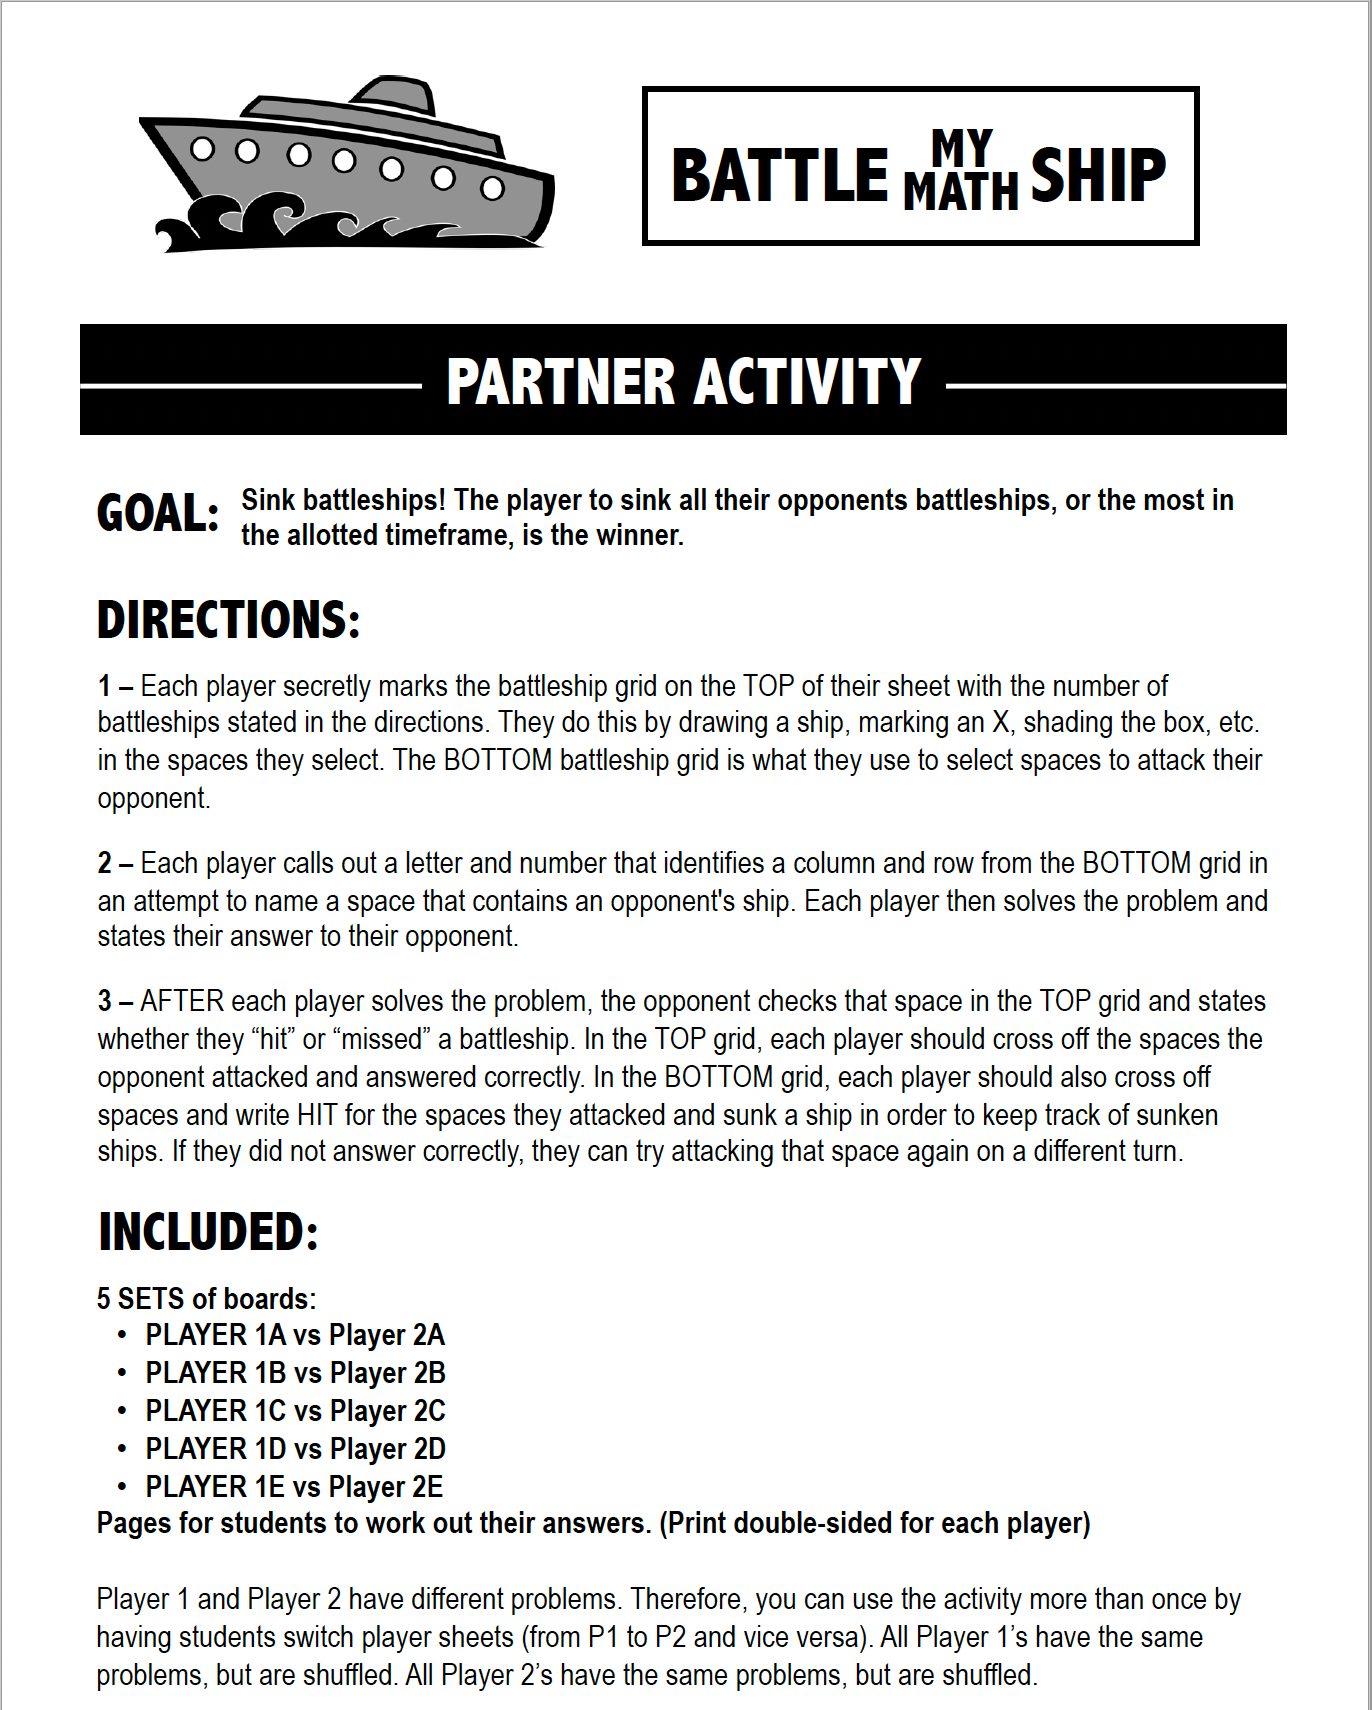 Exponent Rules Activity | Product Rule | Battleship Game